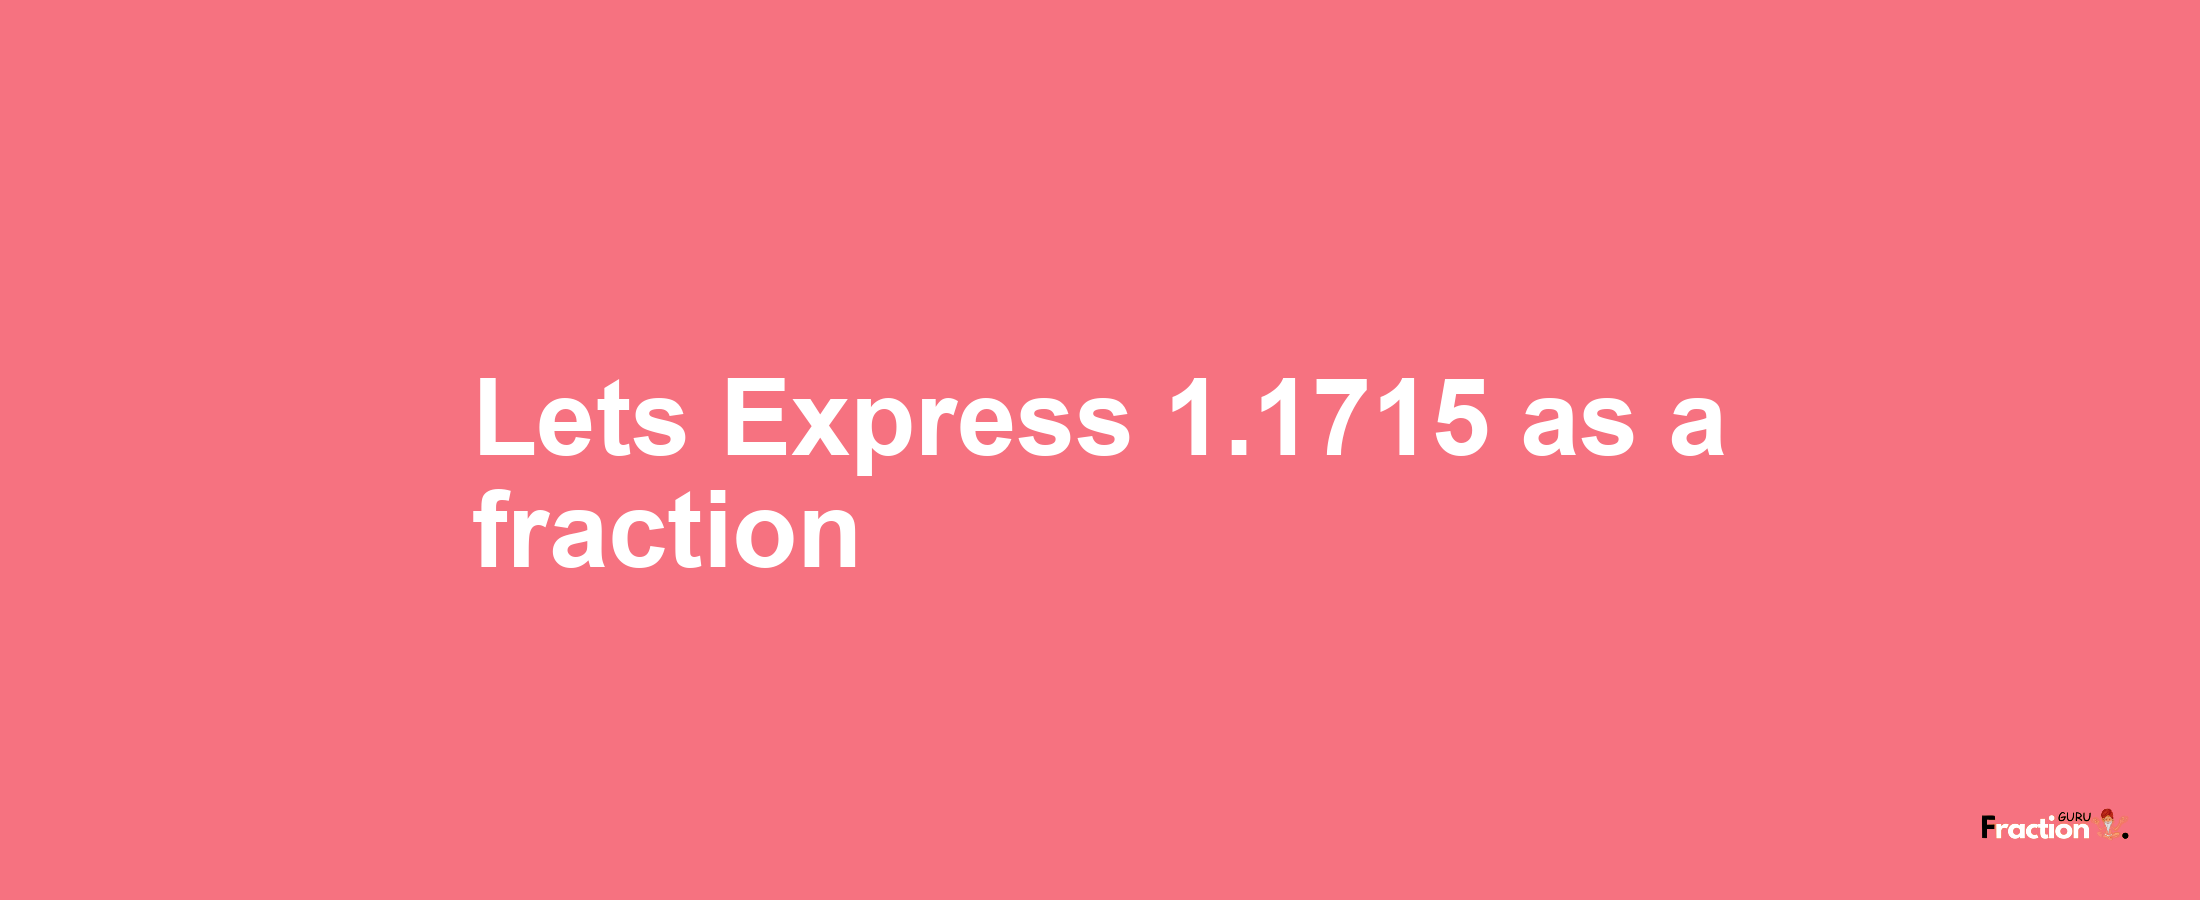 Lets Express 1.1715 as afraction